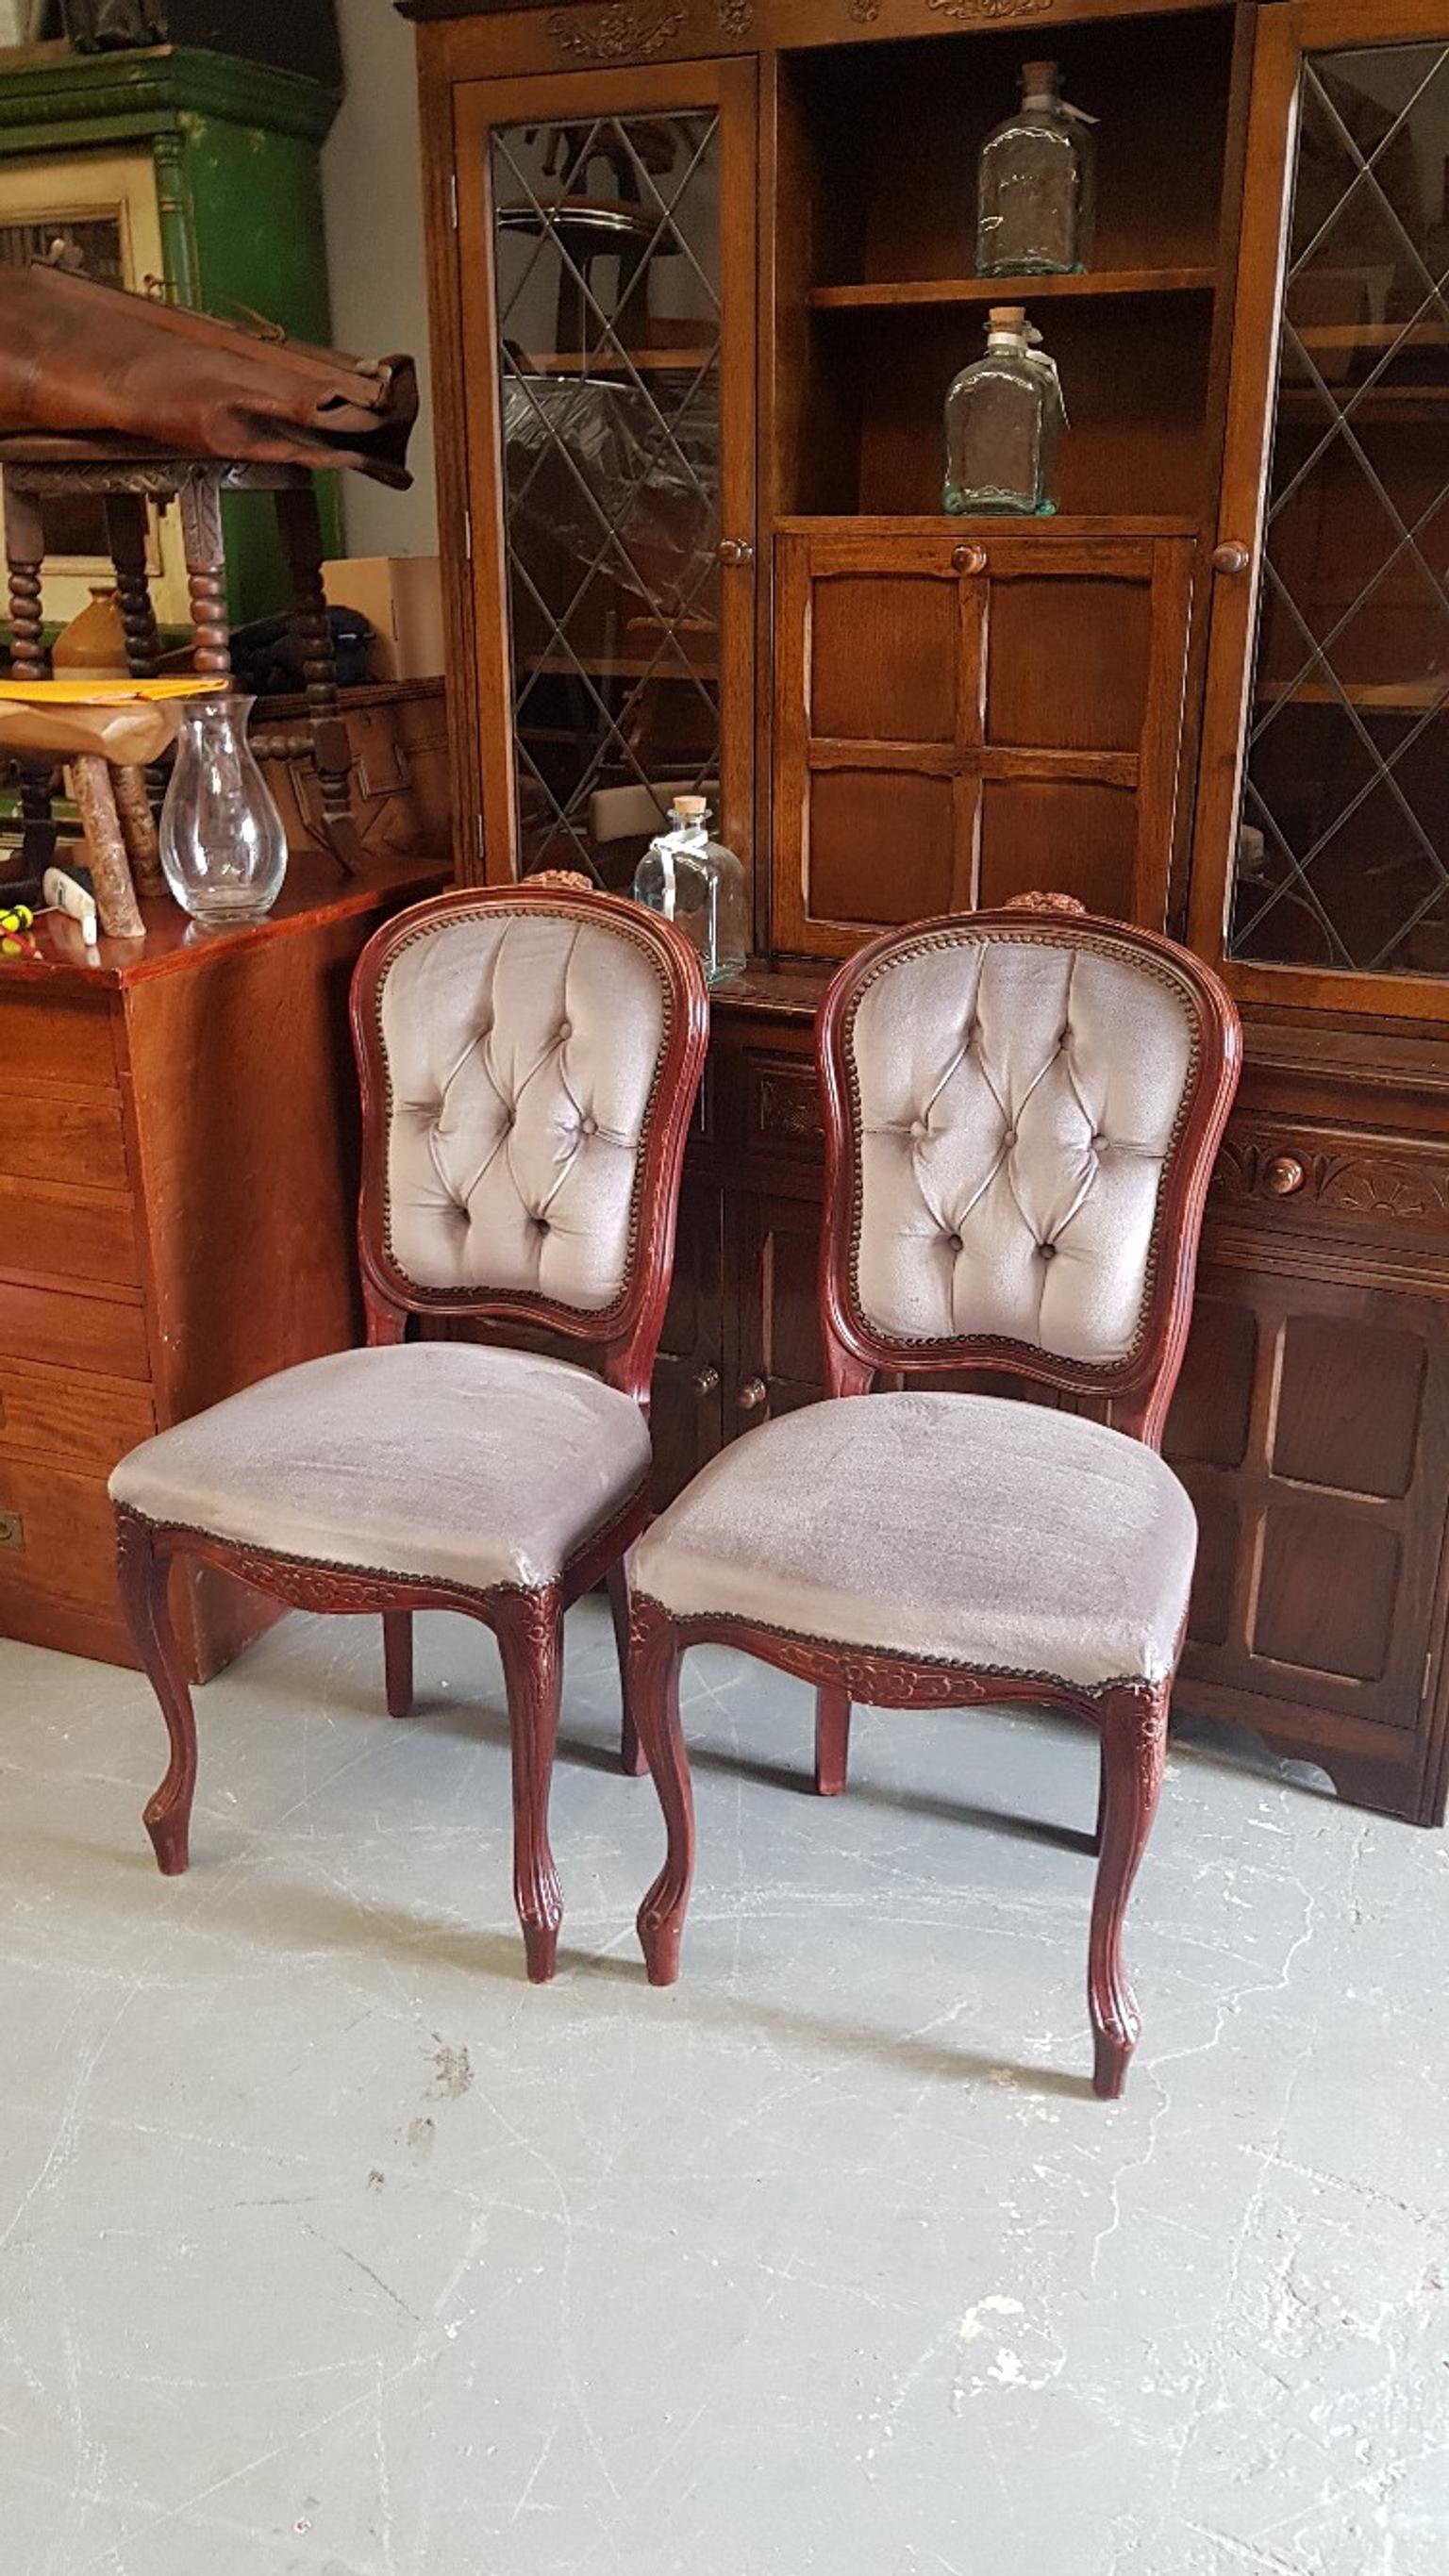 2 French Style Carved Chairs Grey Fabric In B77 Tamworth Fur 25